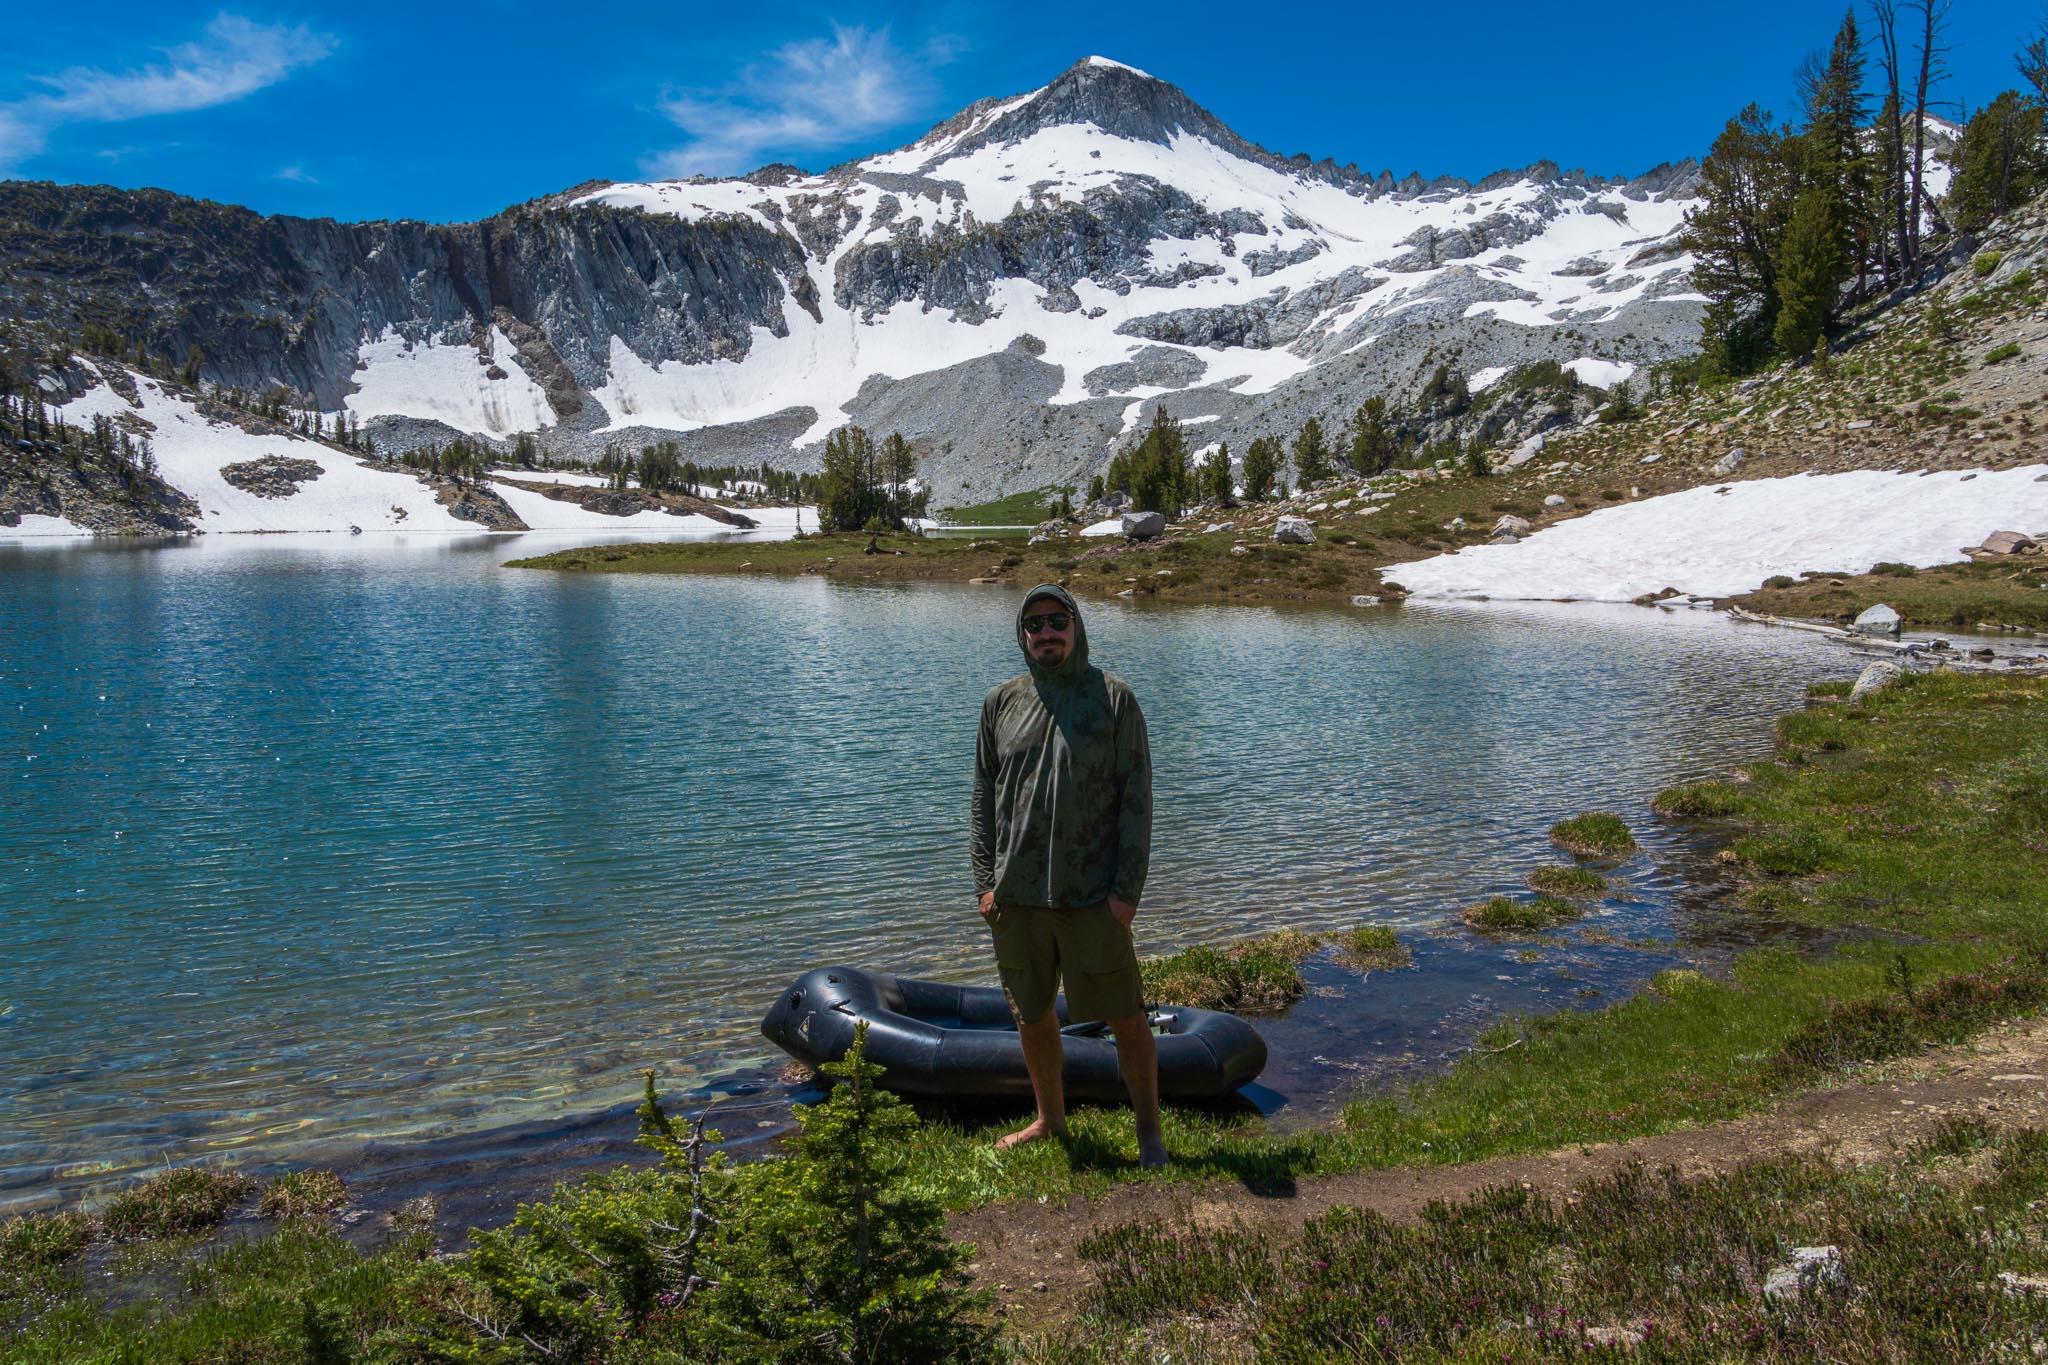 Brock with a packraft at Glacier Lake in the Eagle Cap wilderness